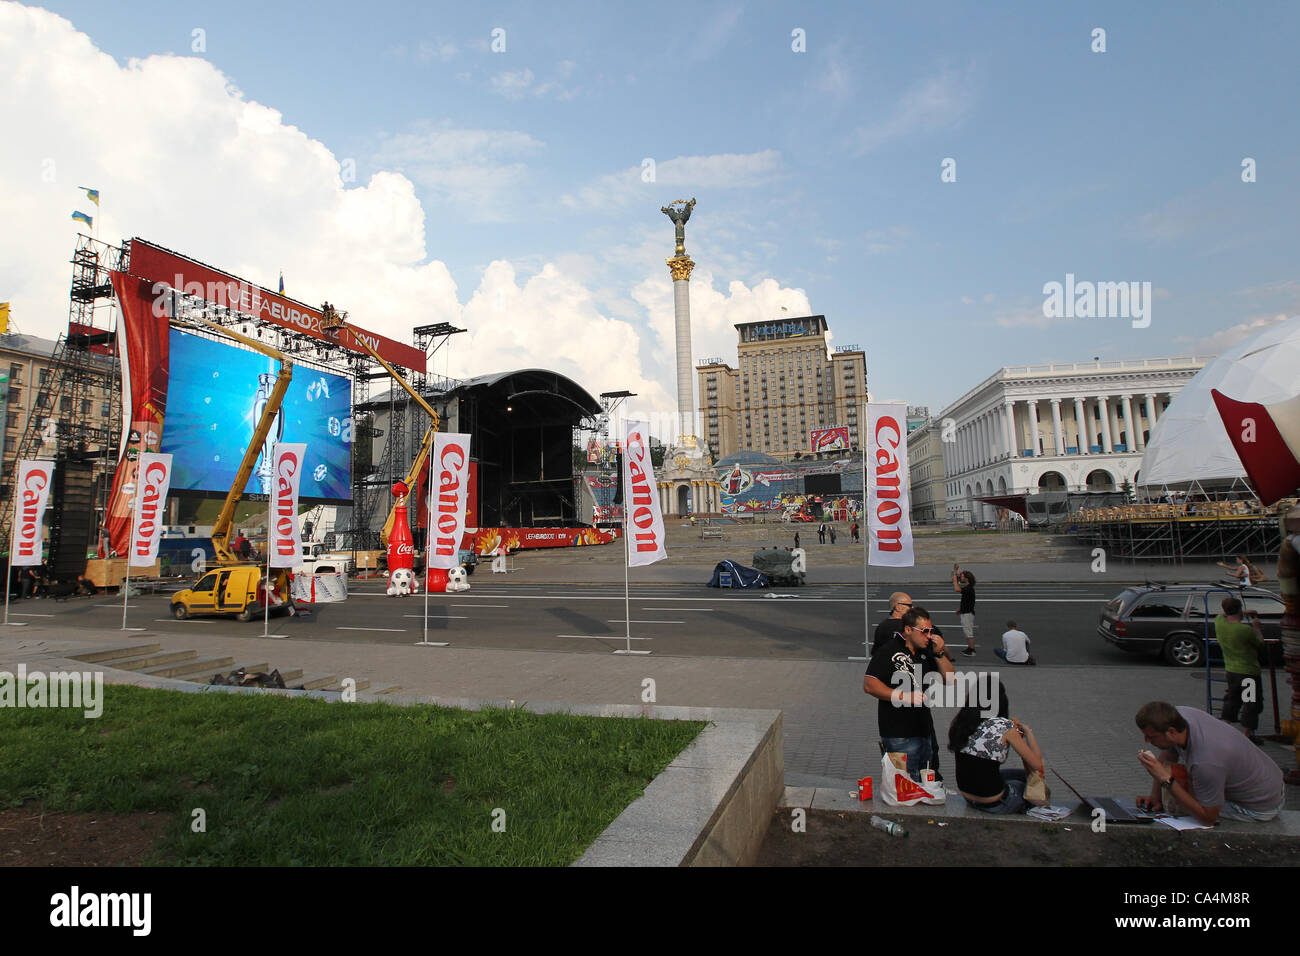 07.06.2012 Fanzone for the Euro 2012 soccer championship co-hosted by Poland and Ukraine, in Kiev, Ukraine. Stock Photo